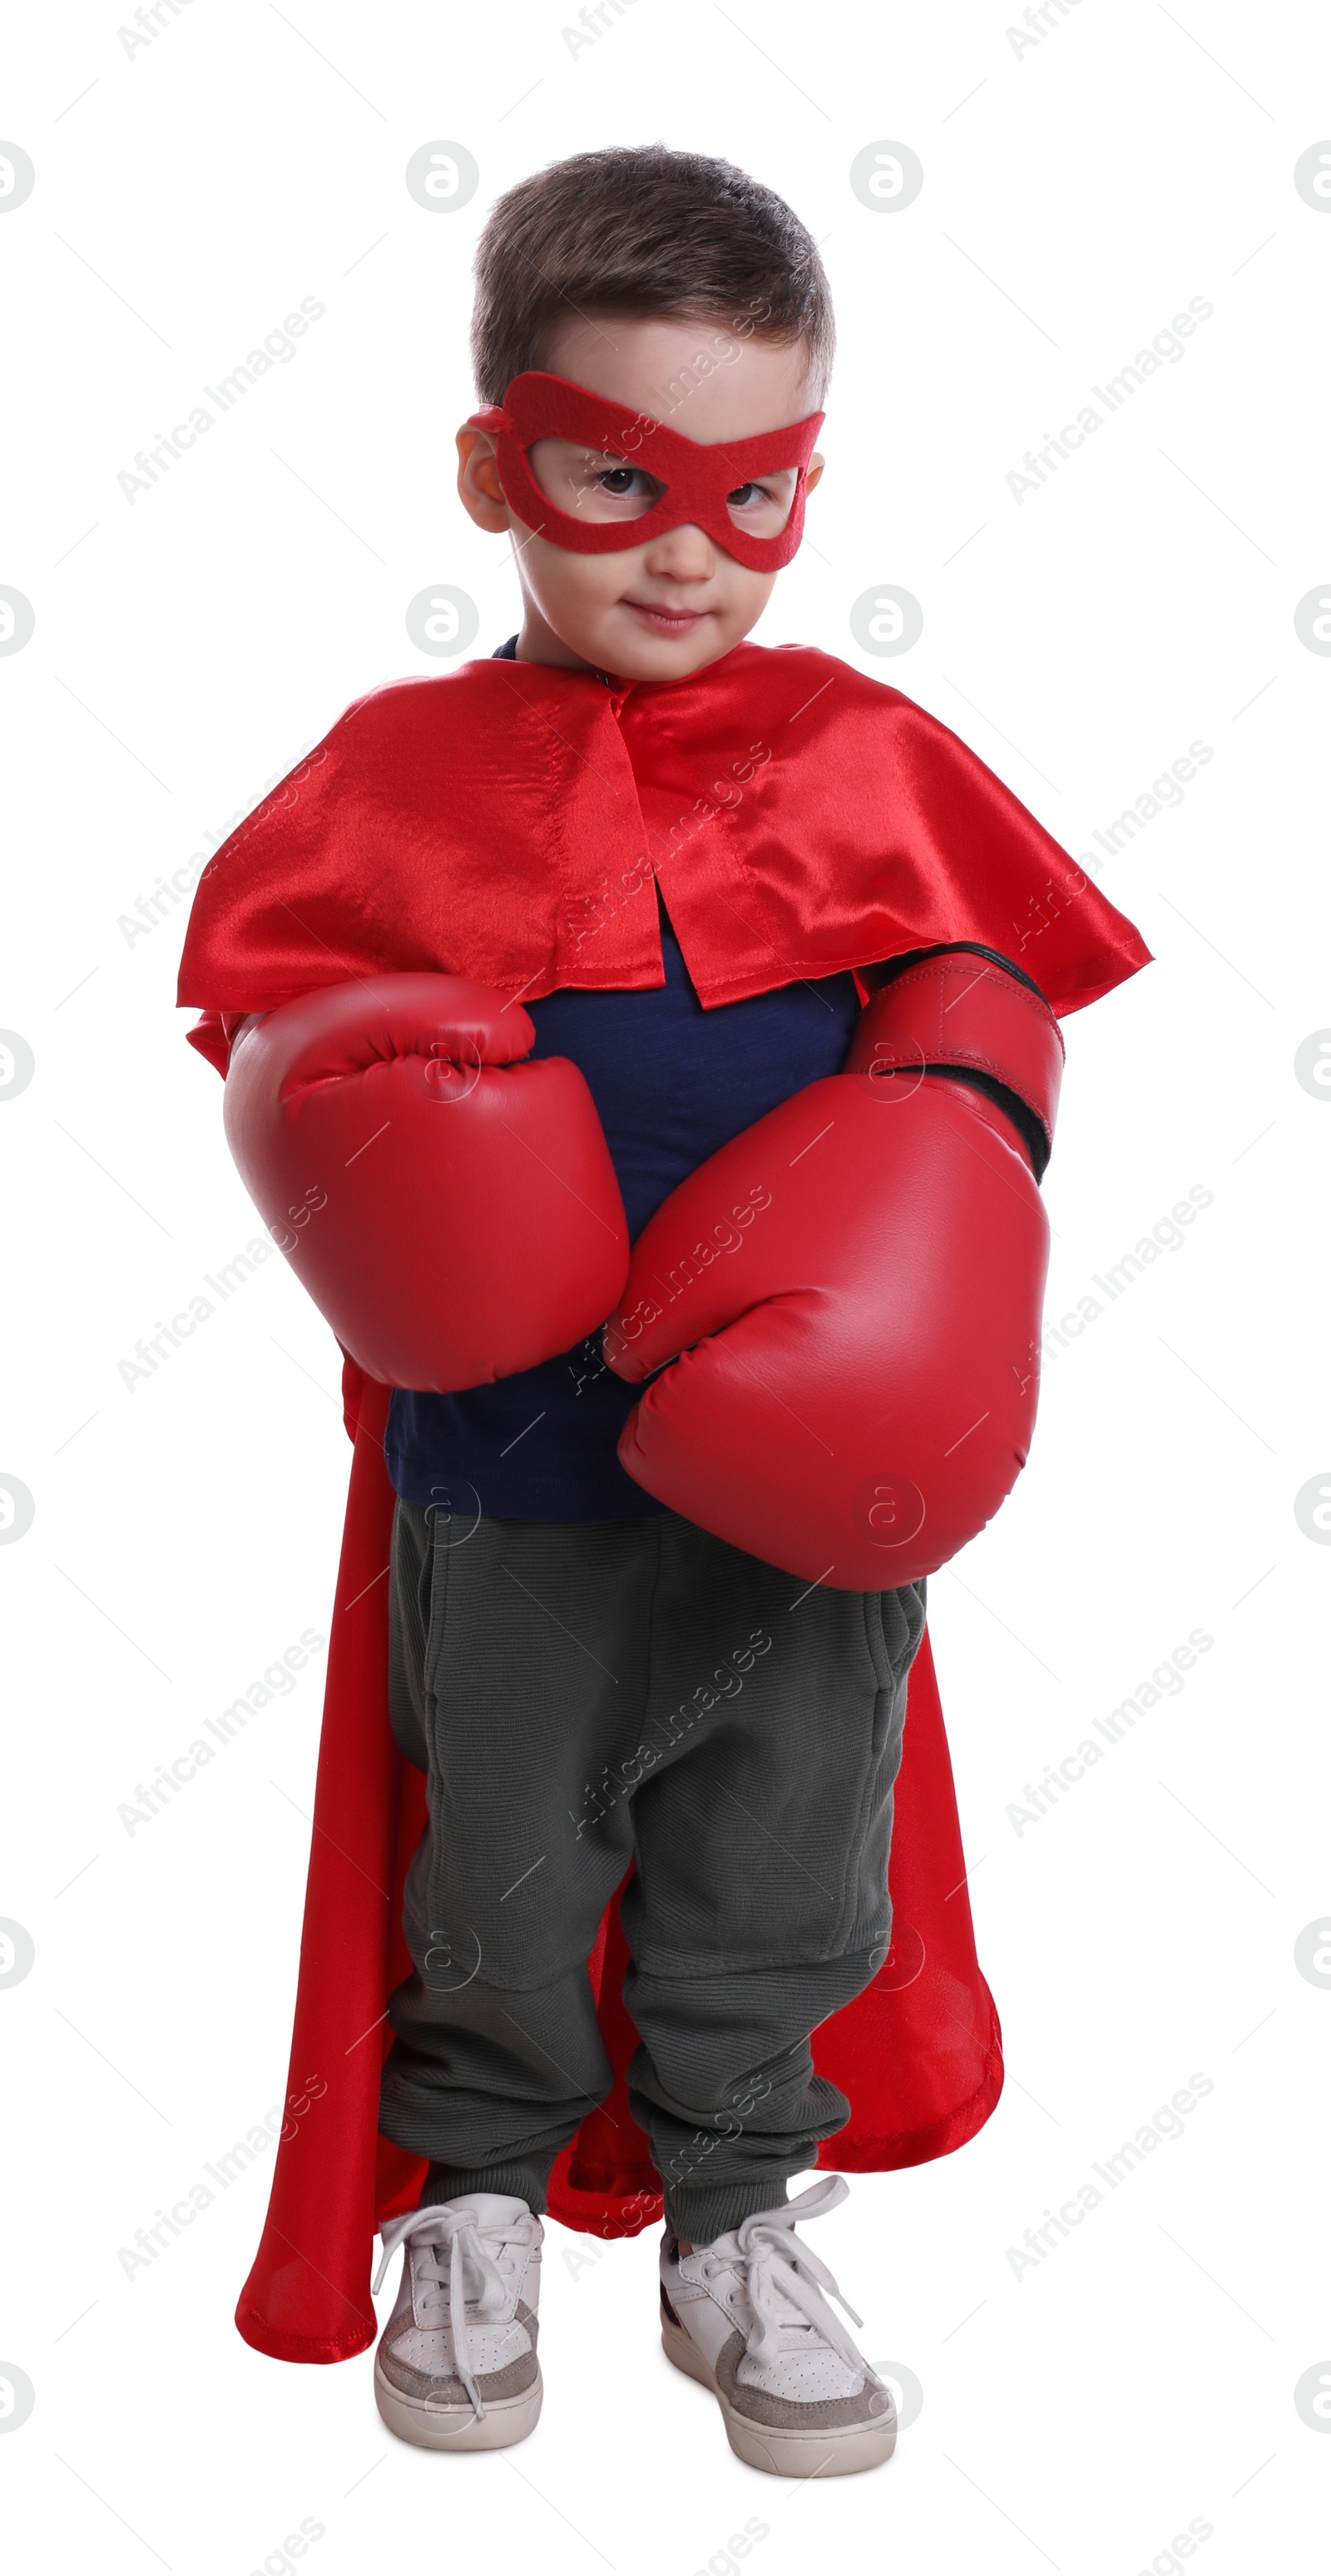 Photo of Cute little boy in superhero suit and boxing gloves on white background